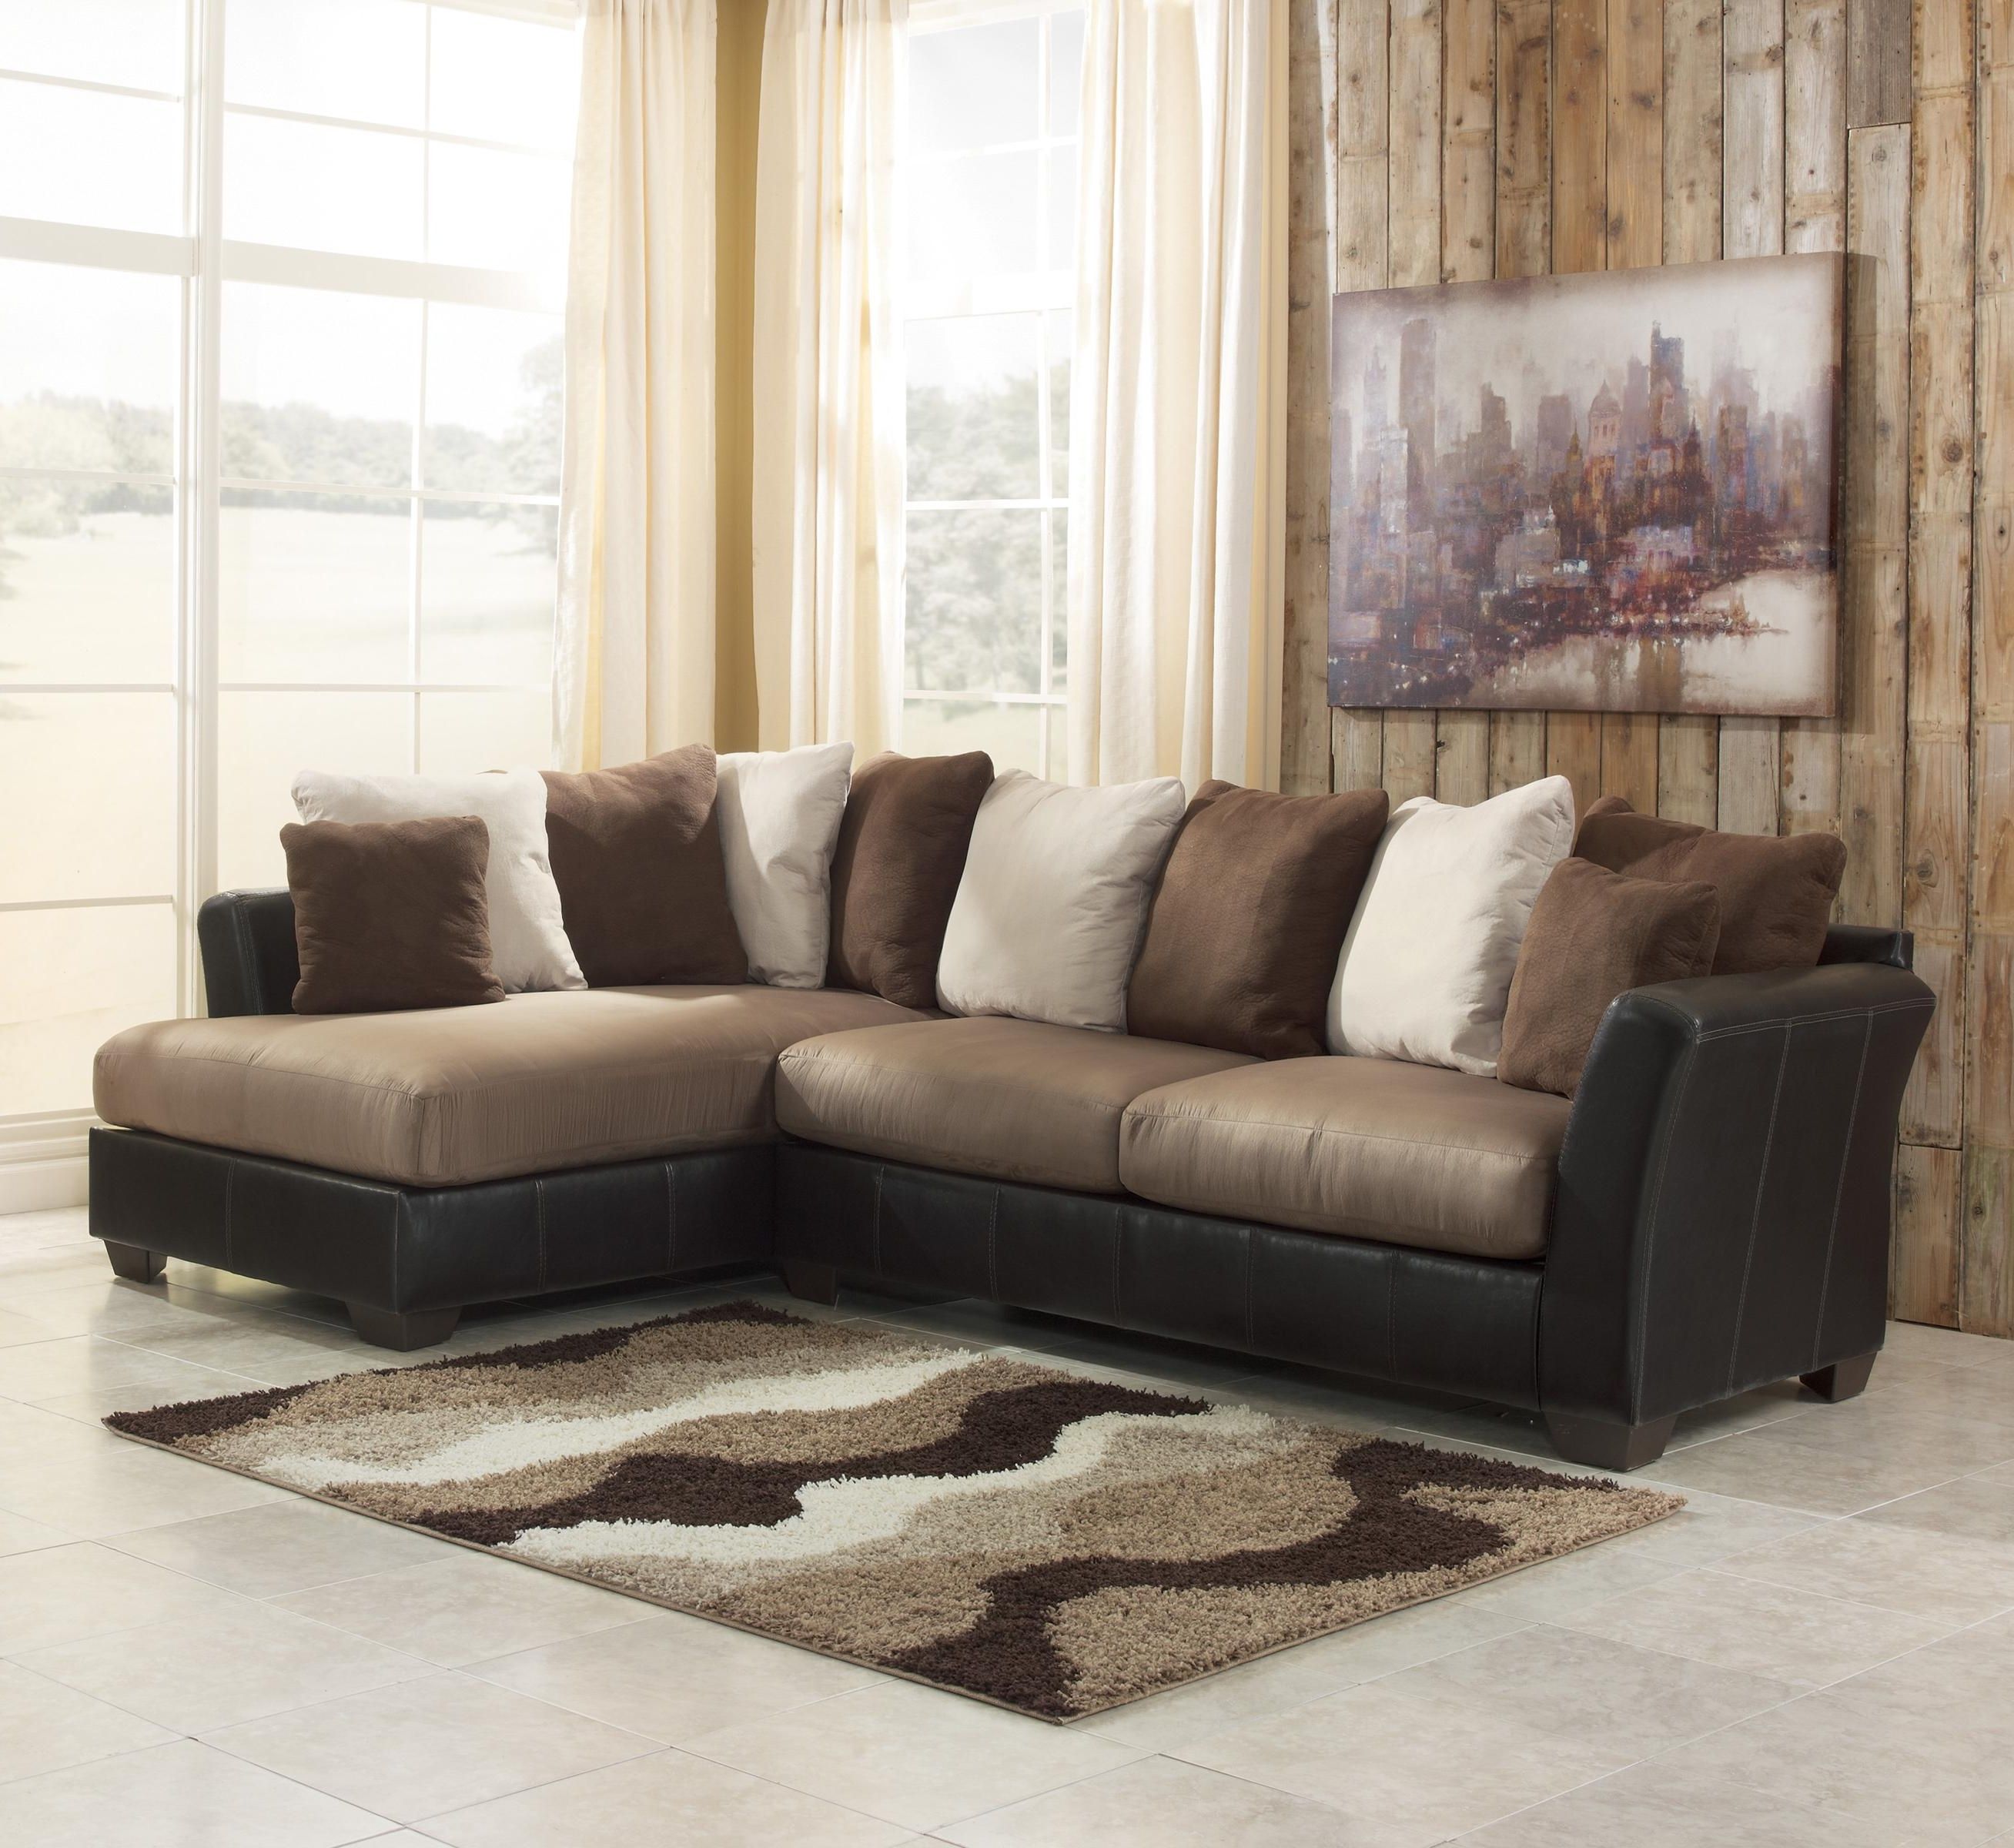 2017 Tan Sectionals With Chaise Within Sectional Sofa Design: 2 Piece Sectional Sofa With Chaise Sleeper (View 3 of 15)